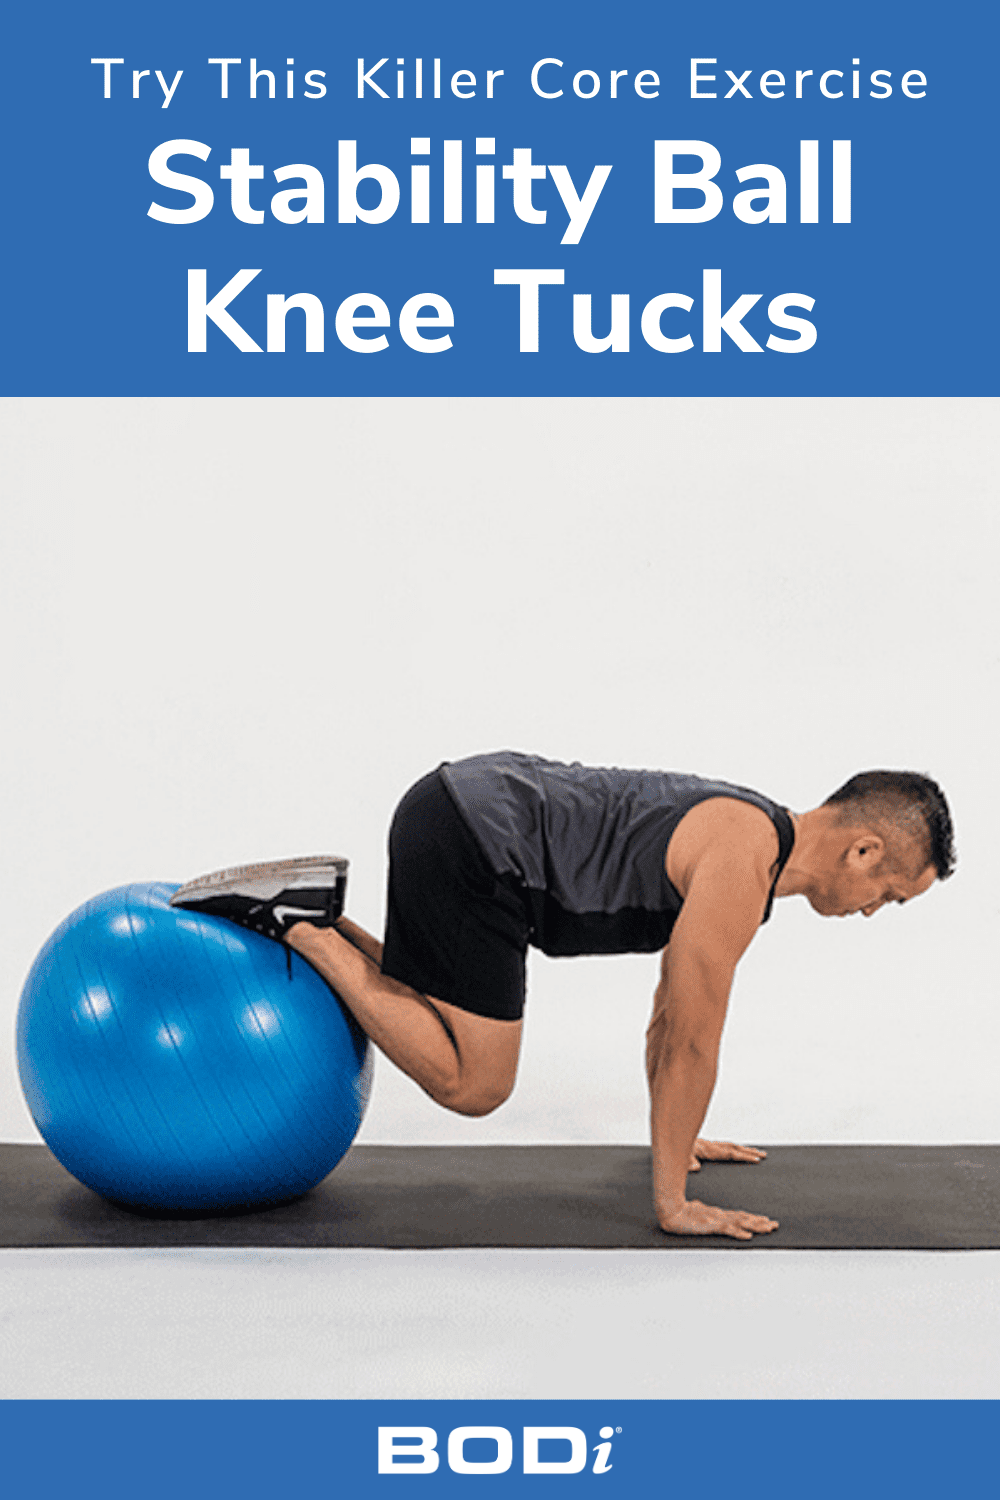 Pin Image of Man Doing Stability Ball Knee Tucks with BODi Logo | Stability Ball Knee Tucks